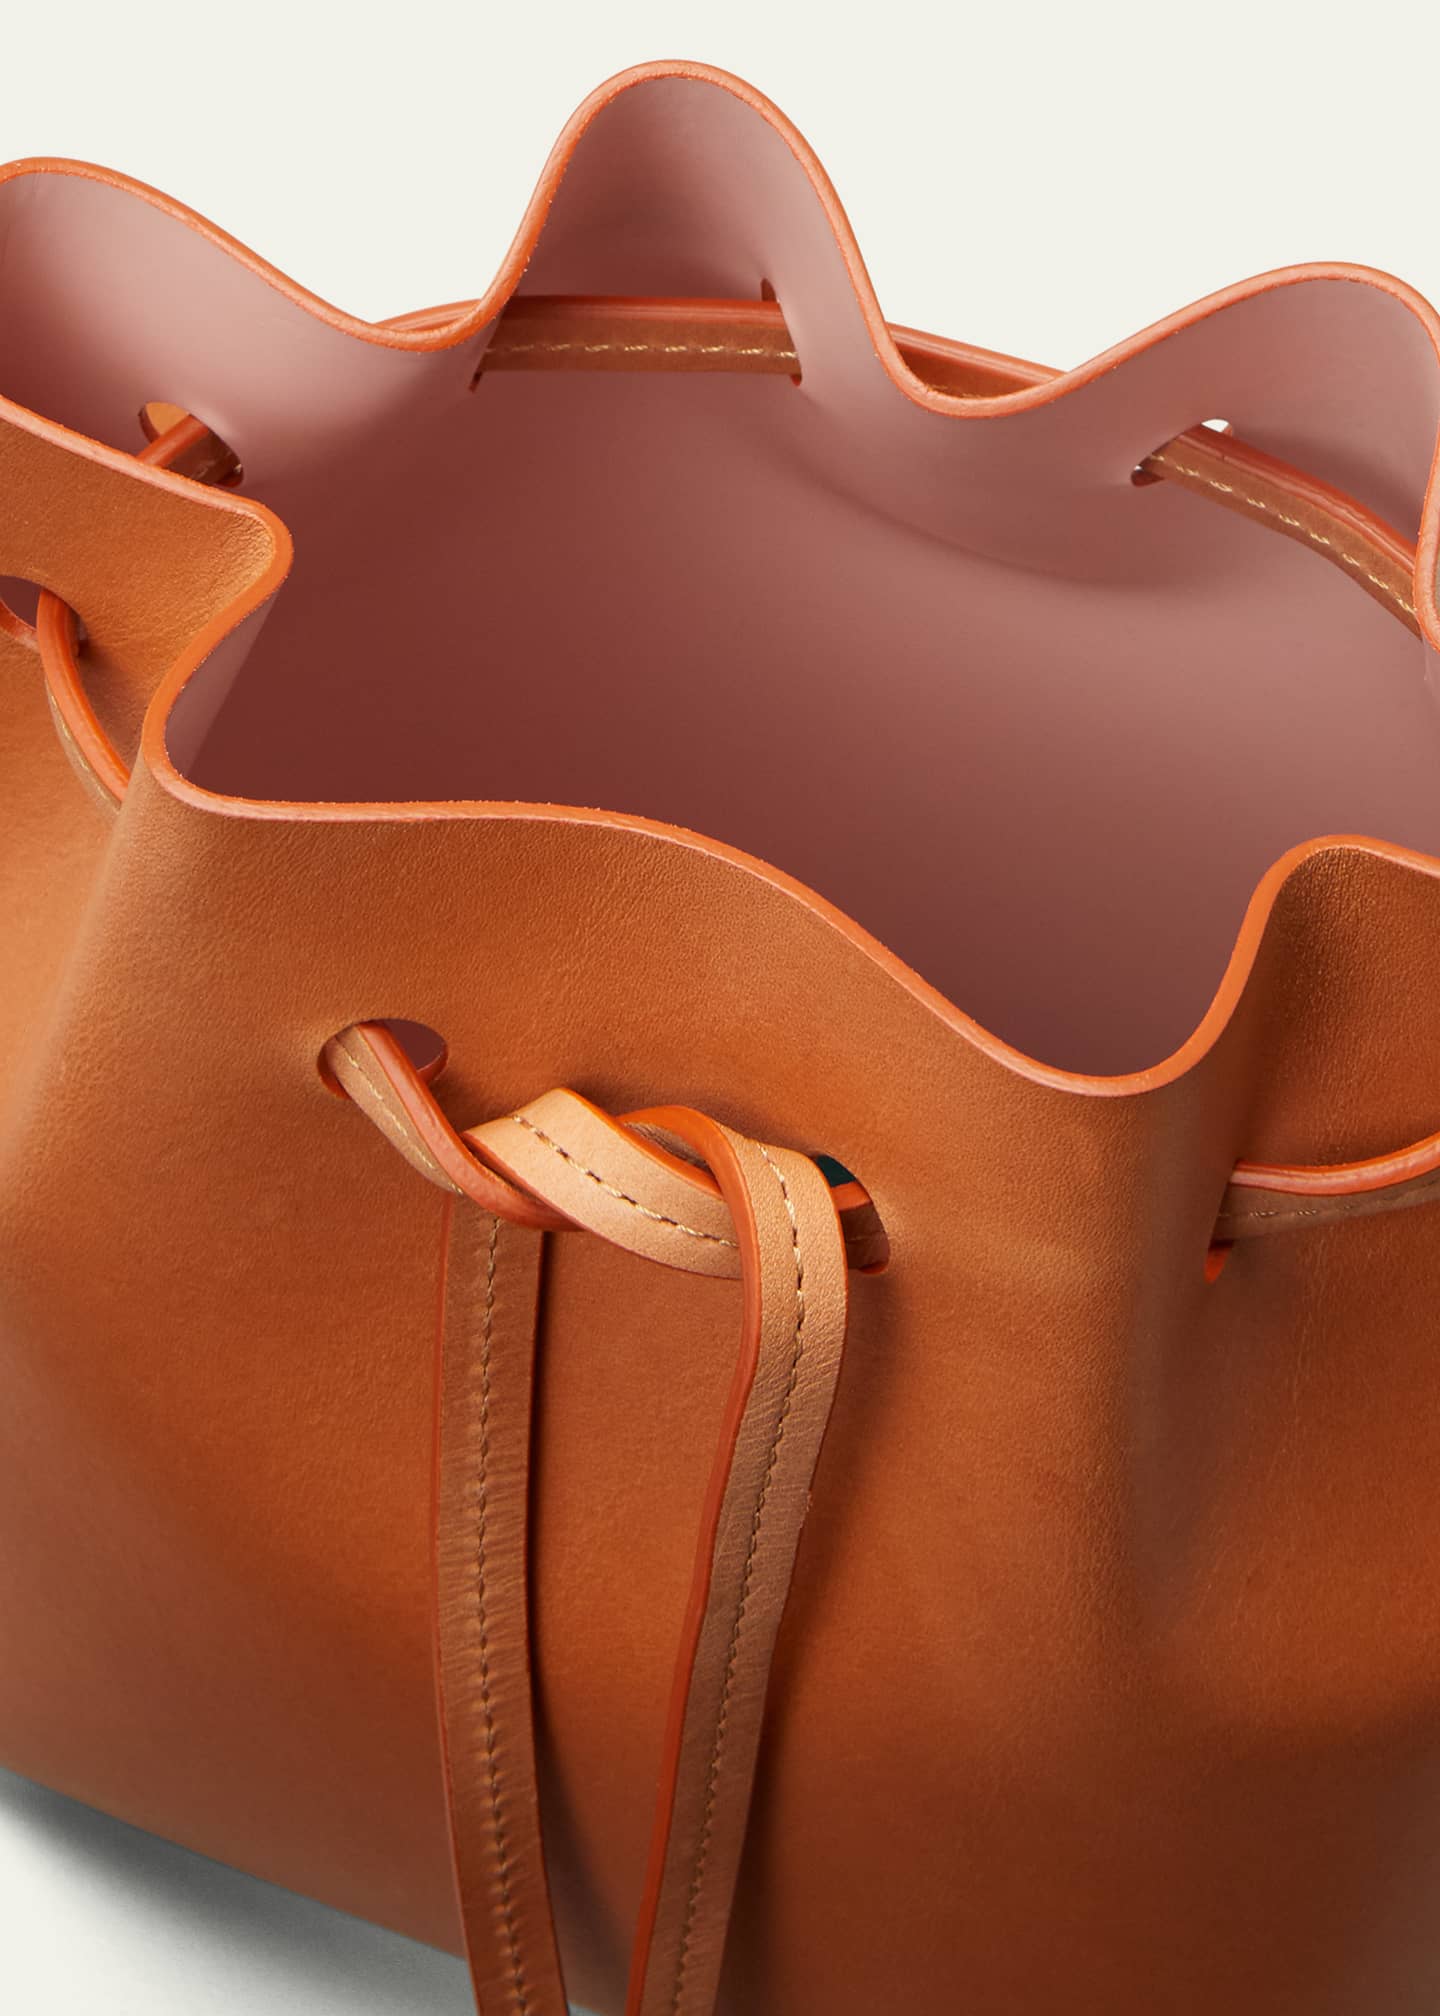 Mansur Gavriel's Baby Bucket Bags Are Actually for Babies - Racked